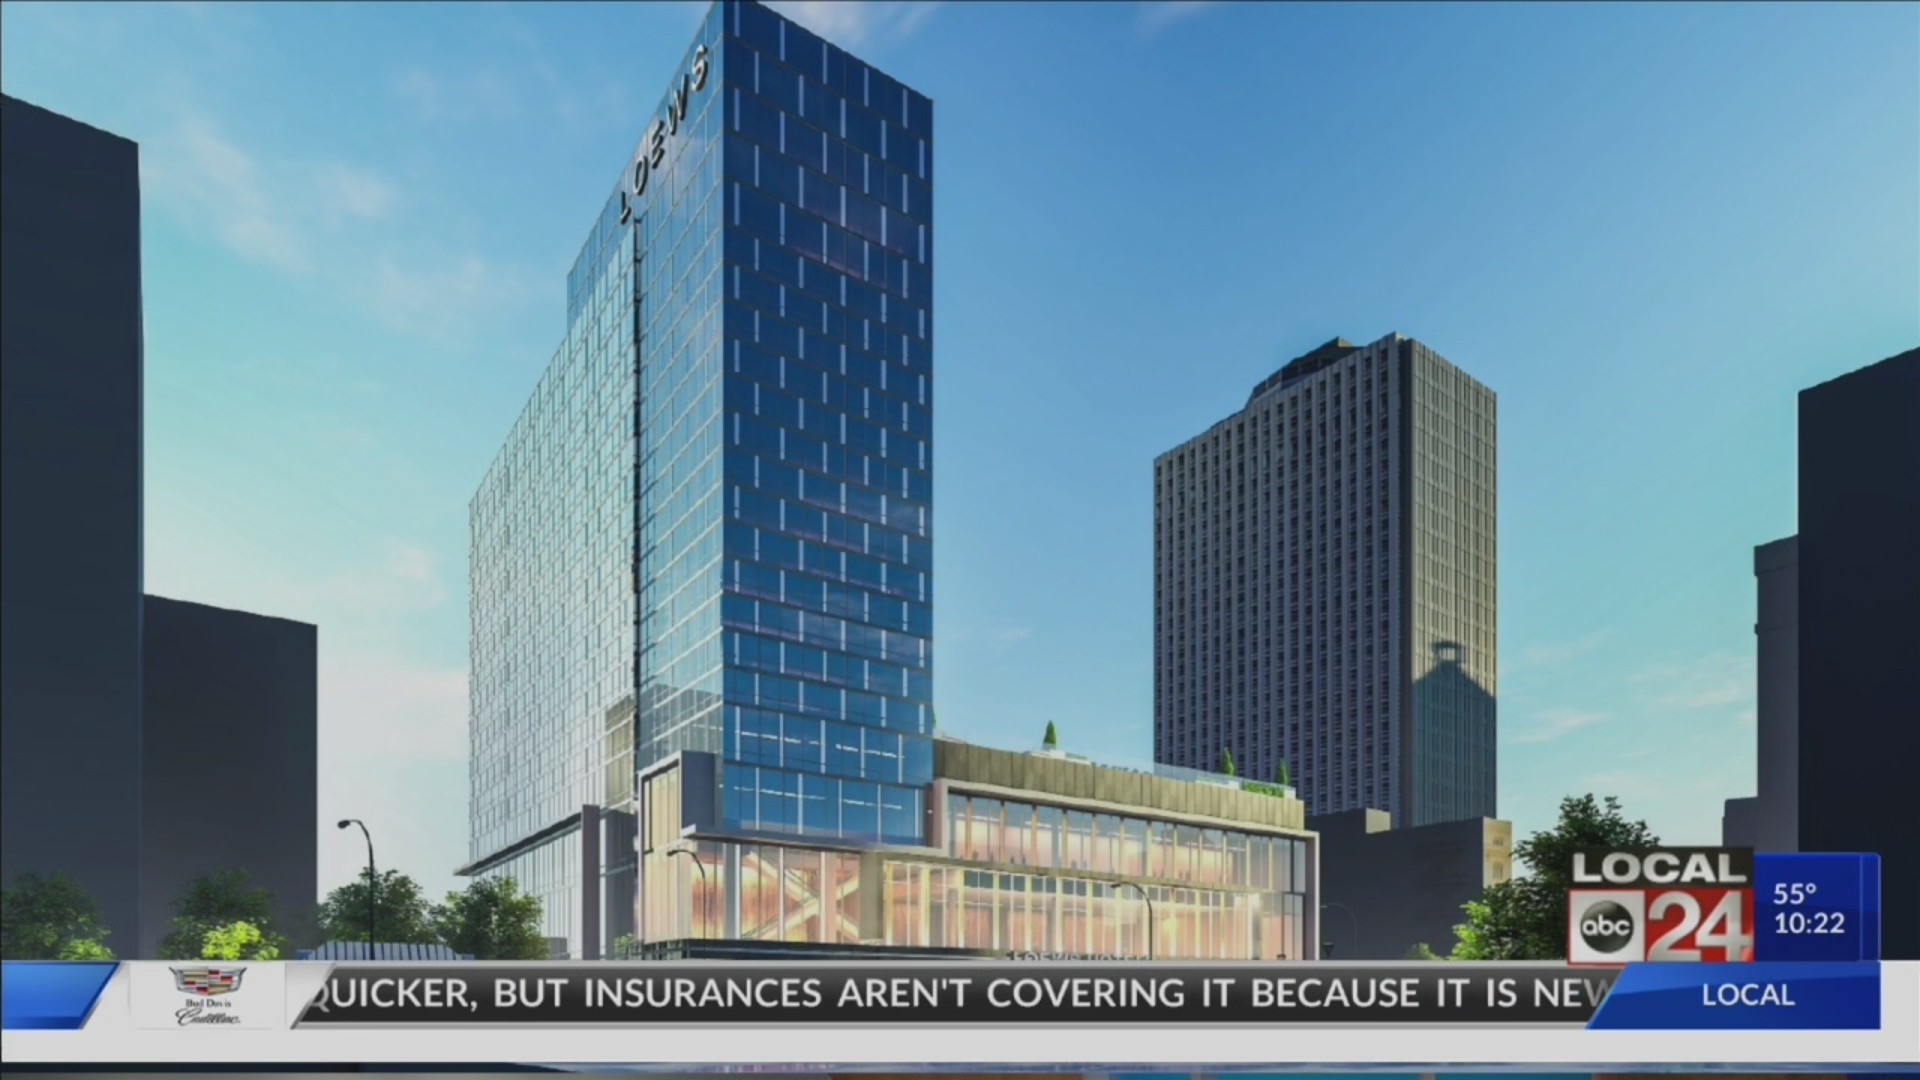 Major hotel developments in downtown Memphis and renovation of Renasant Convention Center bode well for future big-ticket events